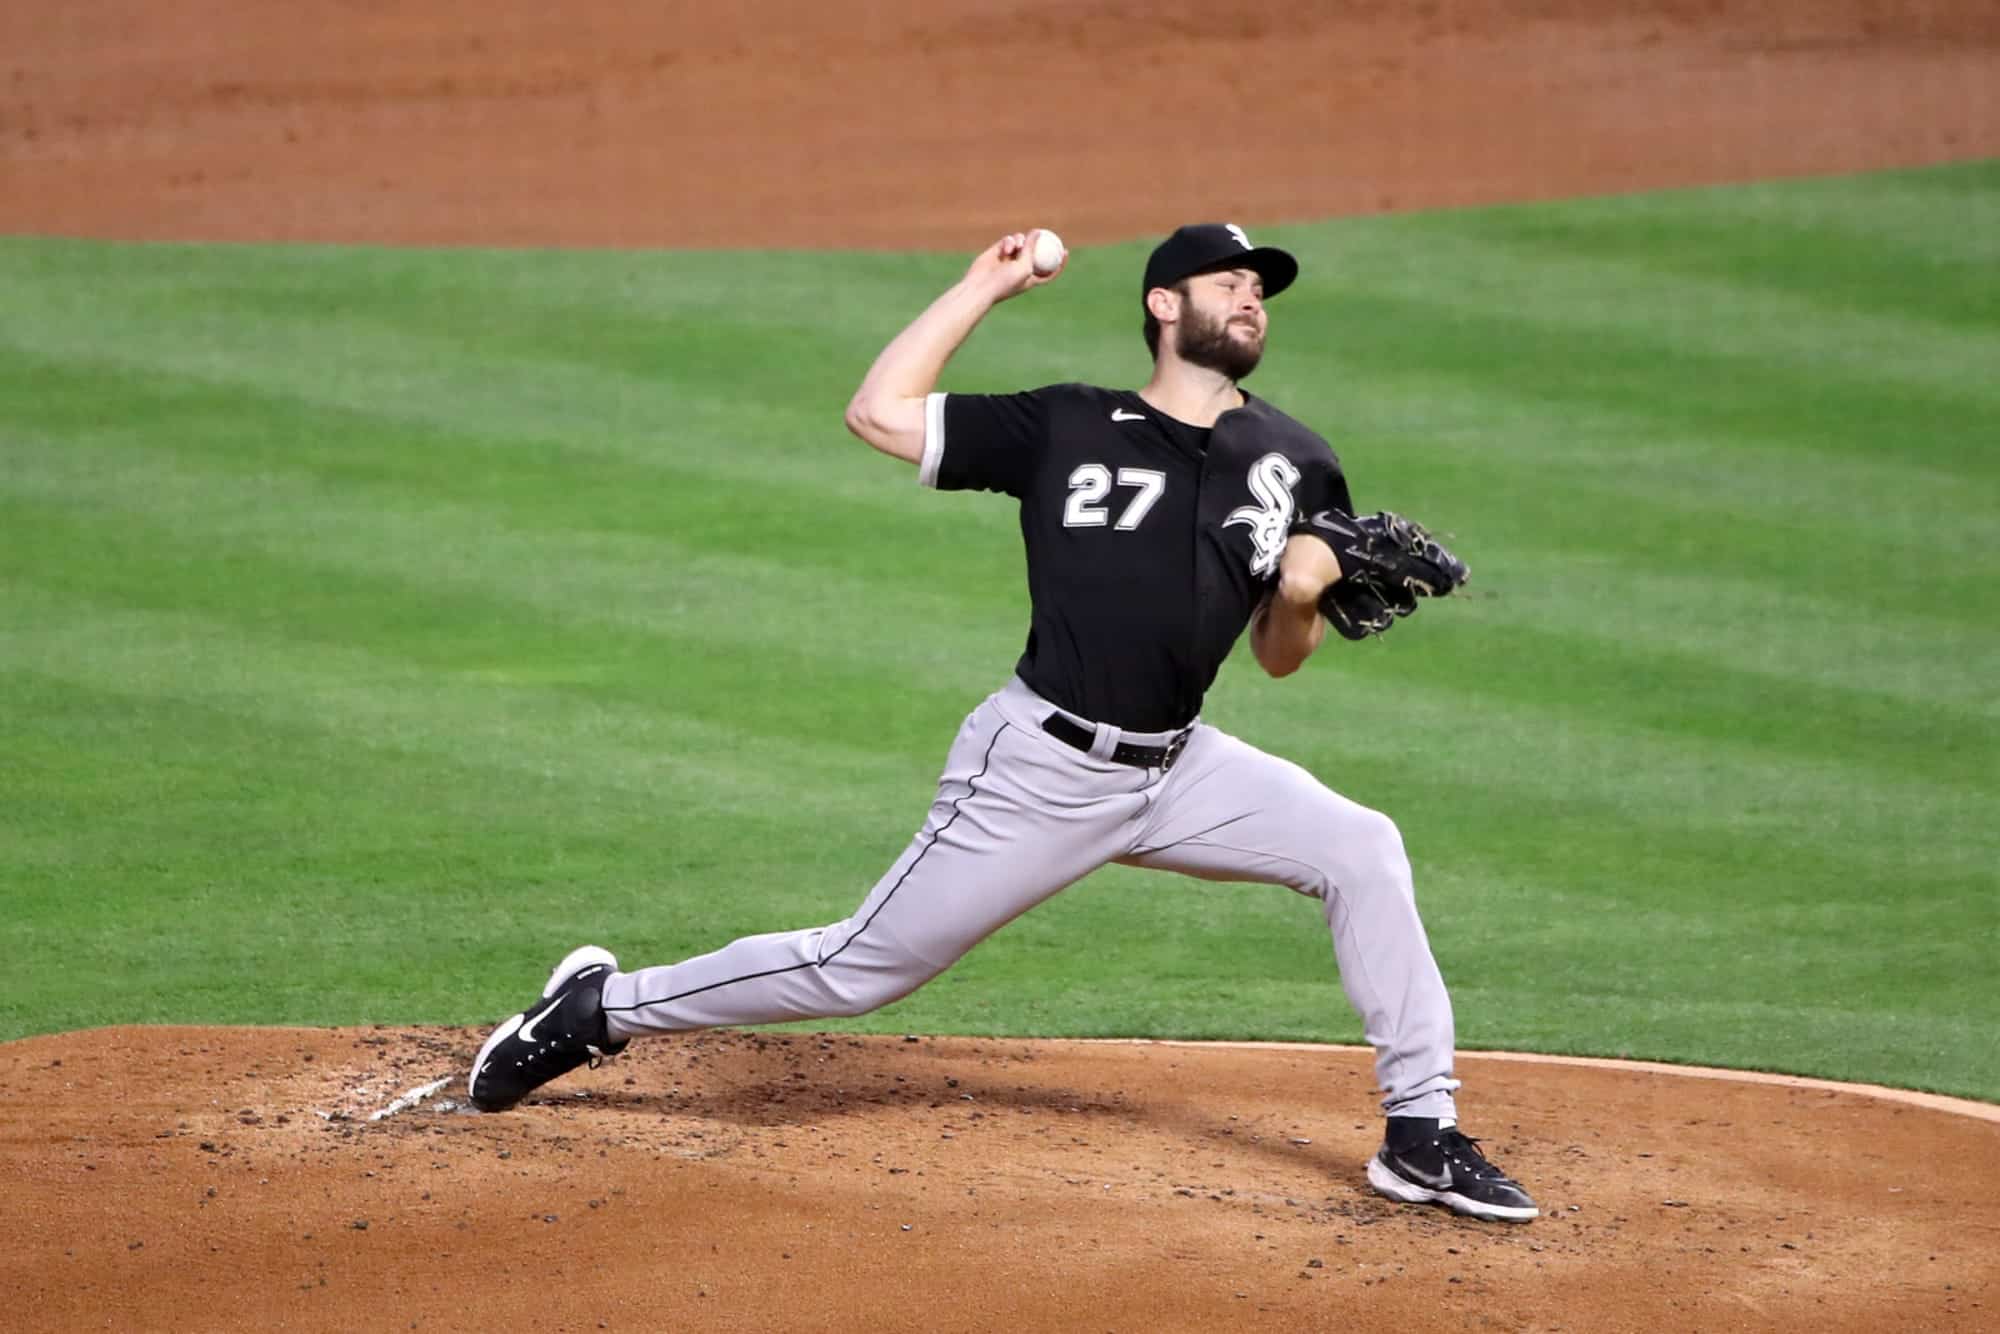 August 24th White Sox at Orioles betting